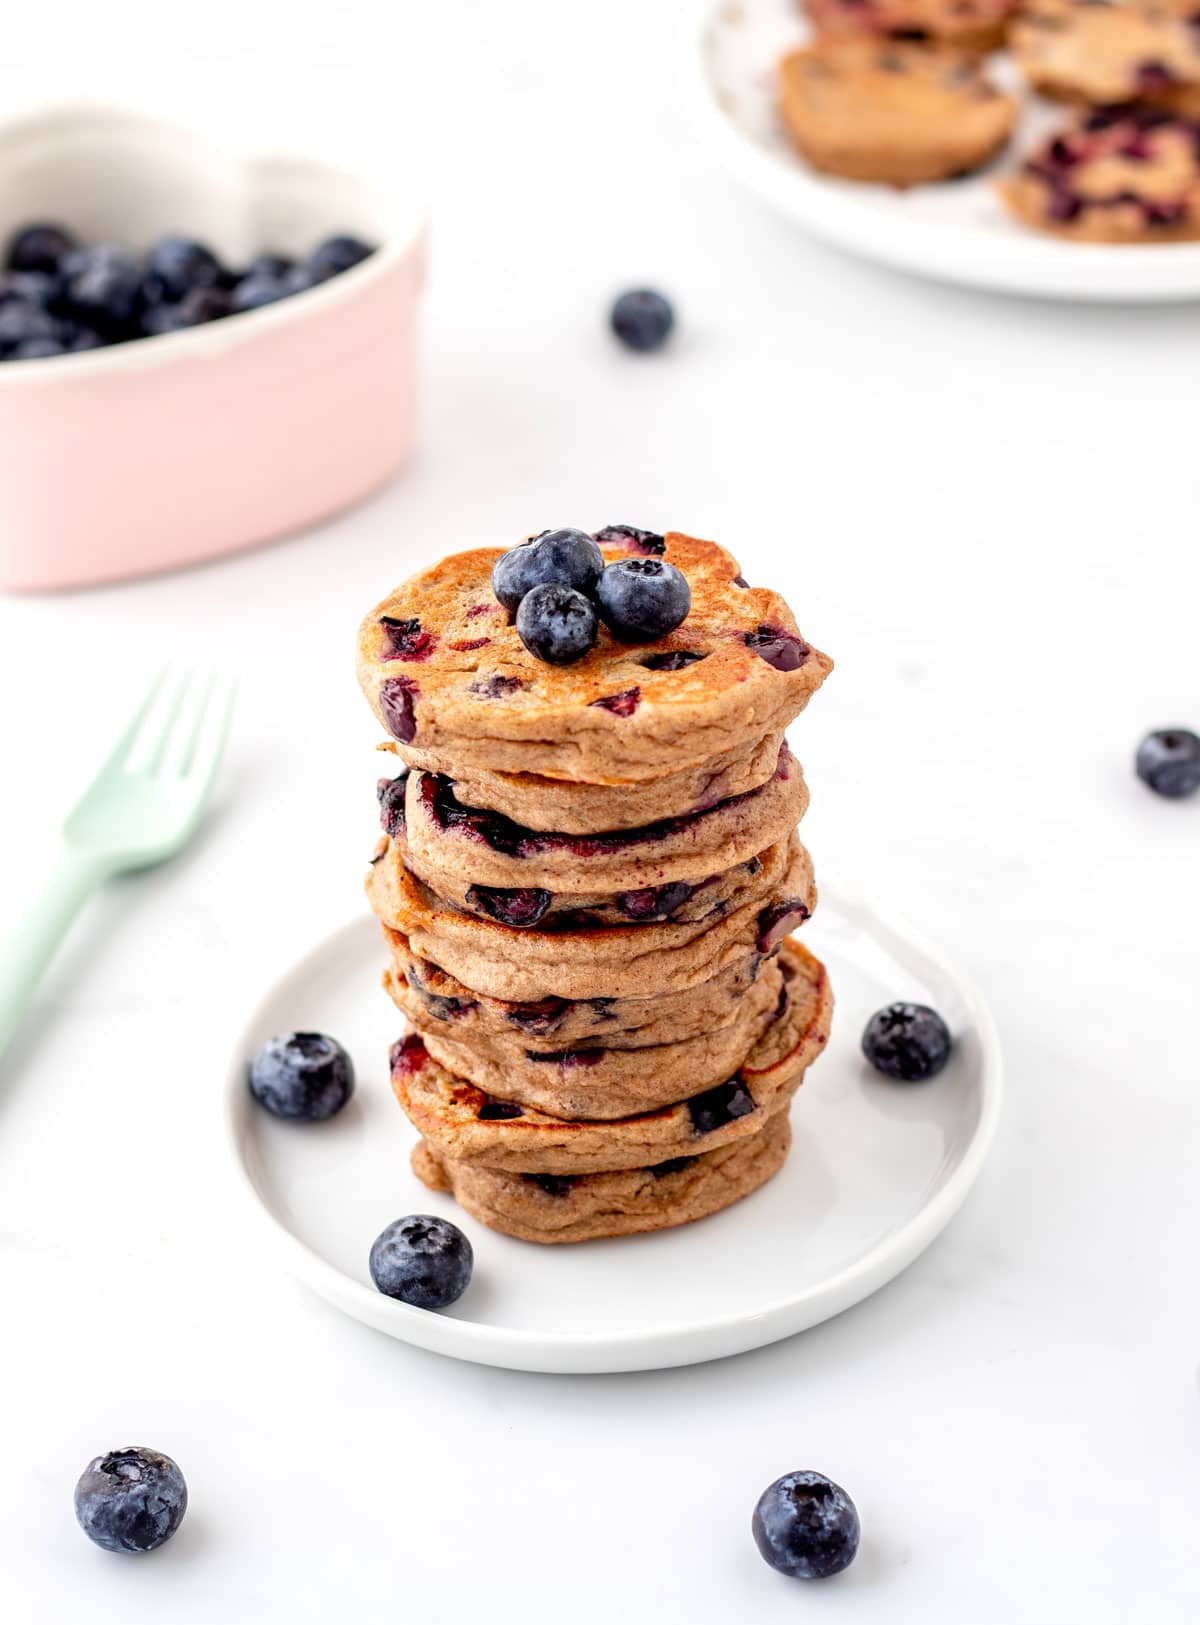 Mini blueberry pancakes stacked on a small white plate.